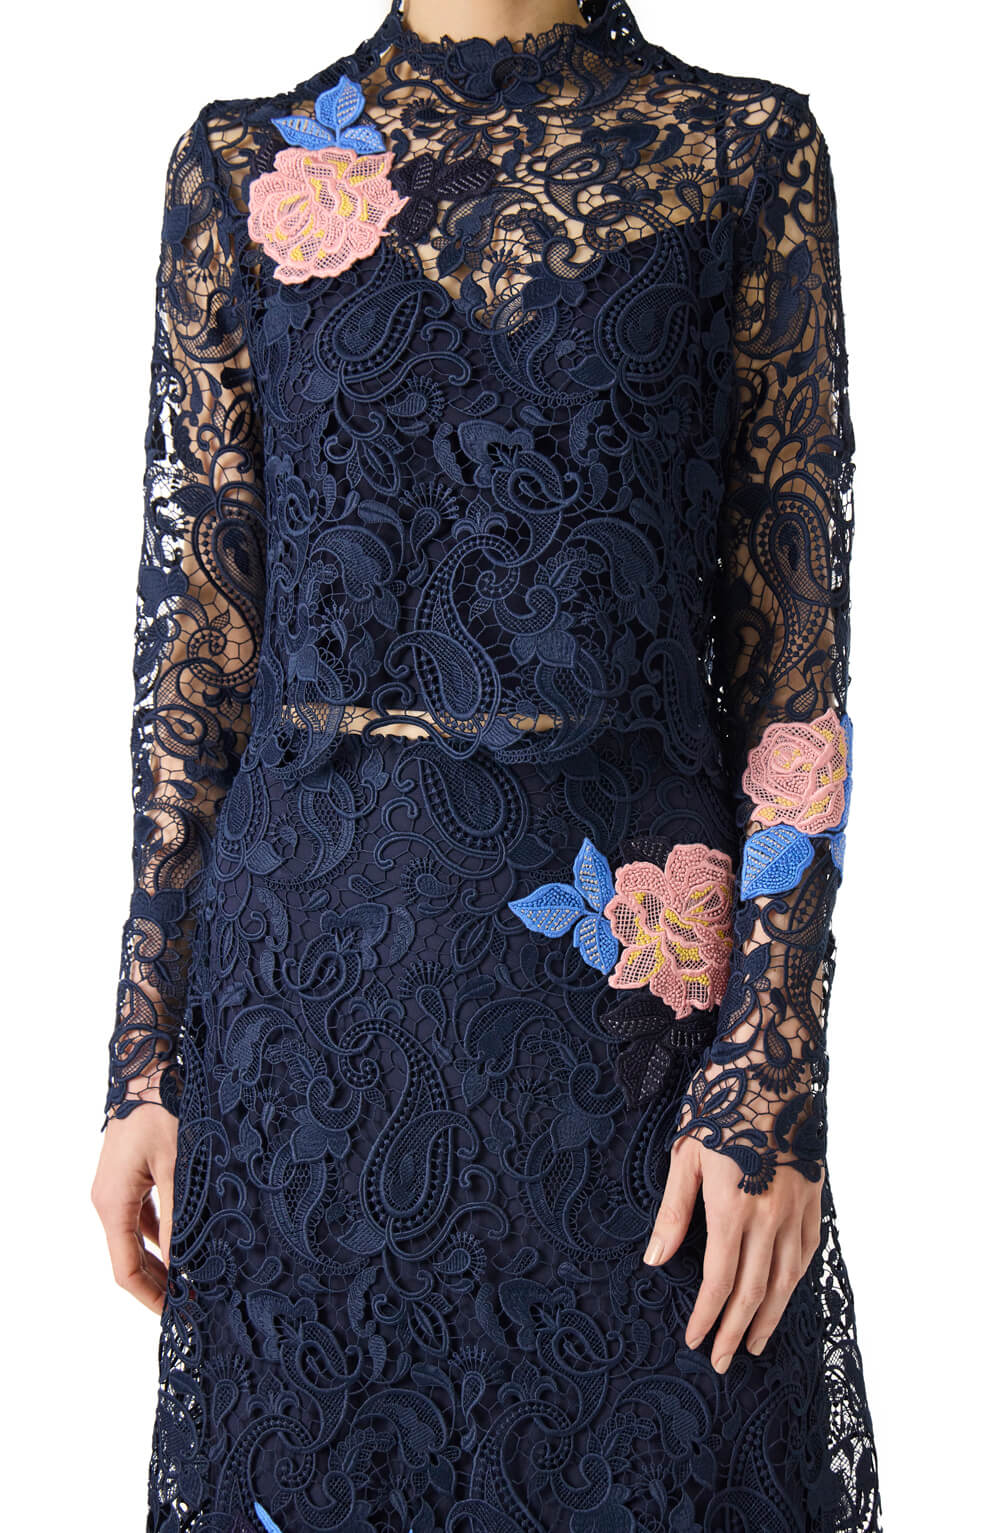 Monique Lhuillier midi-length navy guipure lace skirt with pink lace flowers.